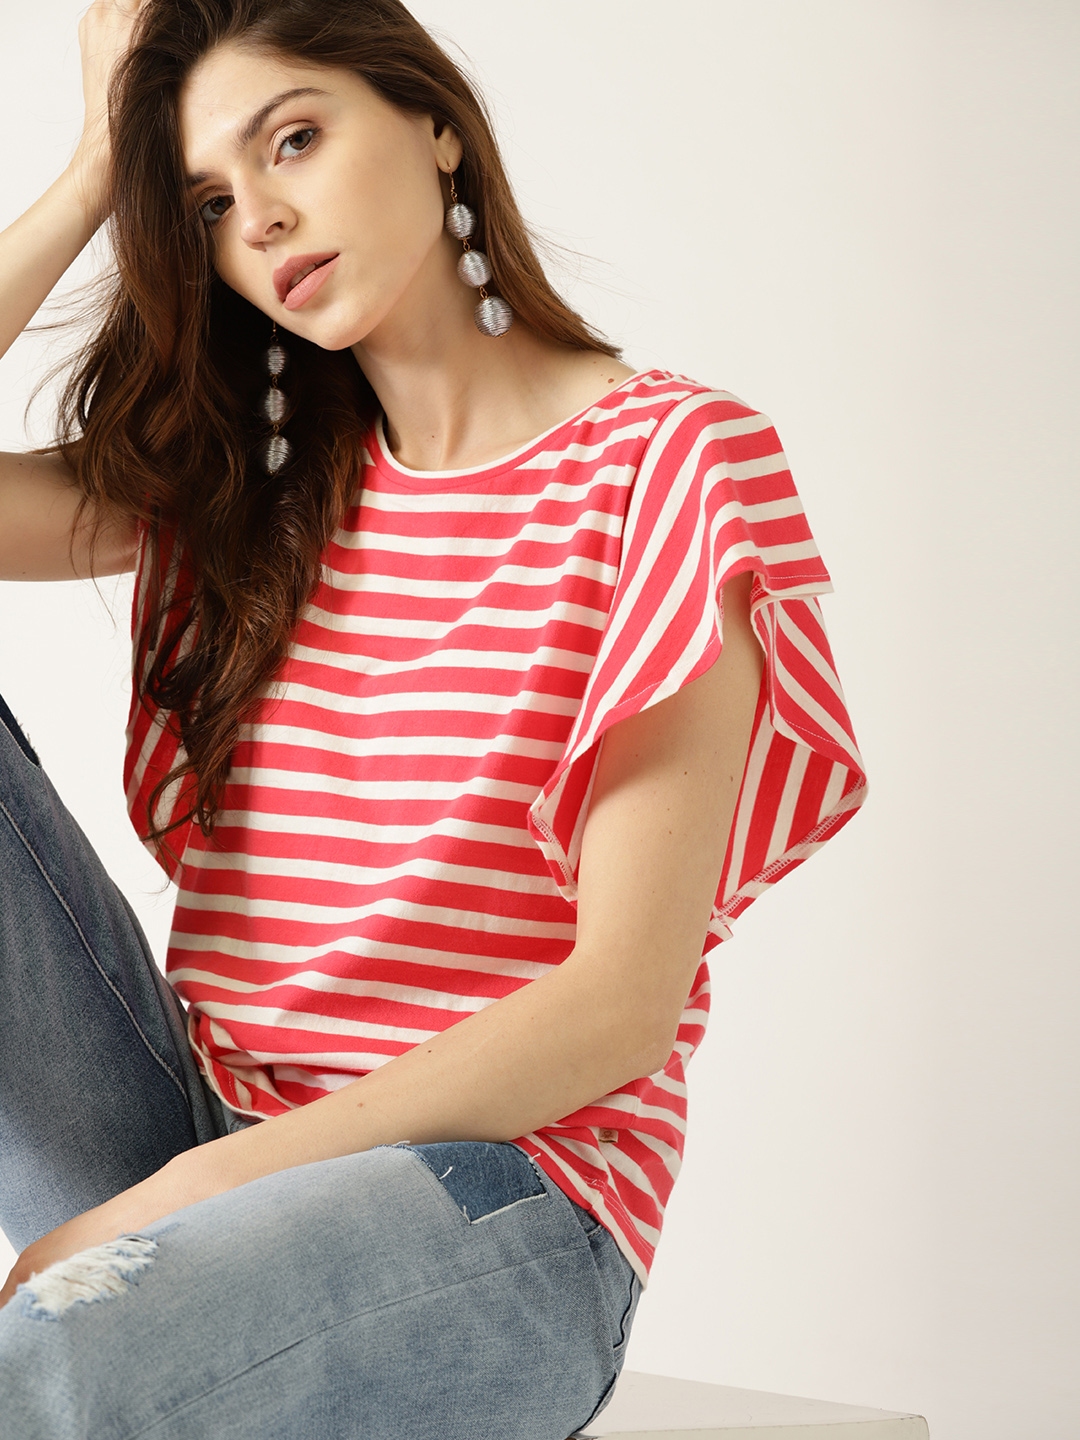 Buy United Colors Of Benetton Women Coral Pink & White Striped Top ...